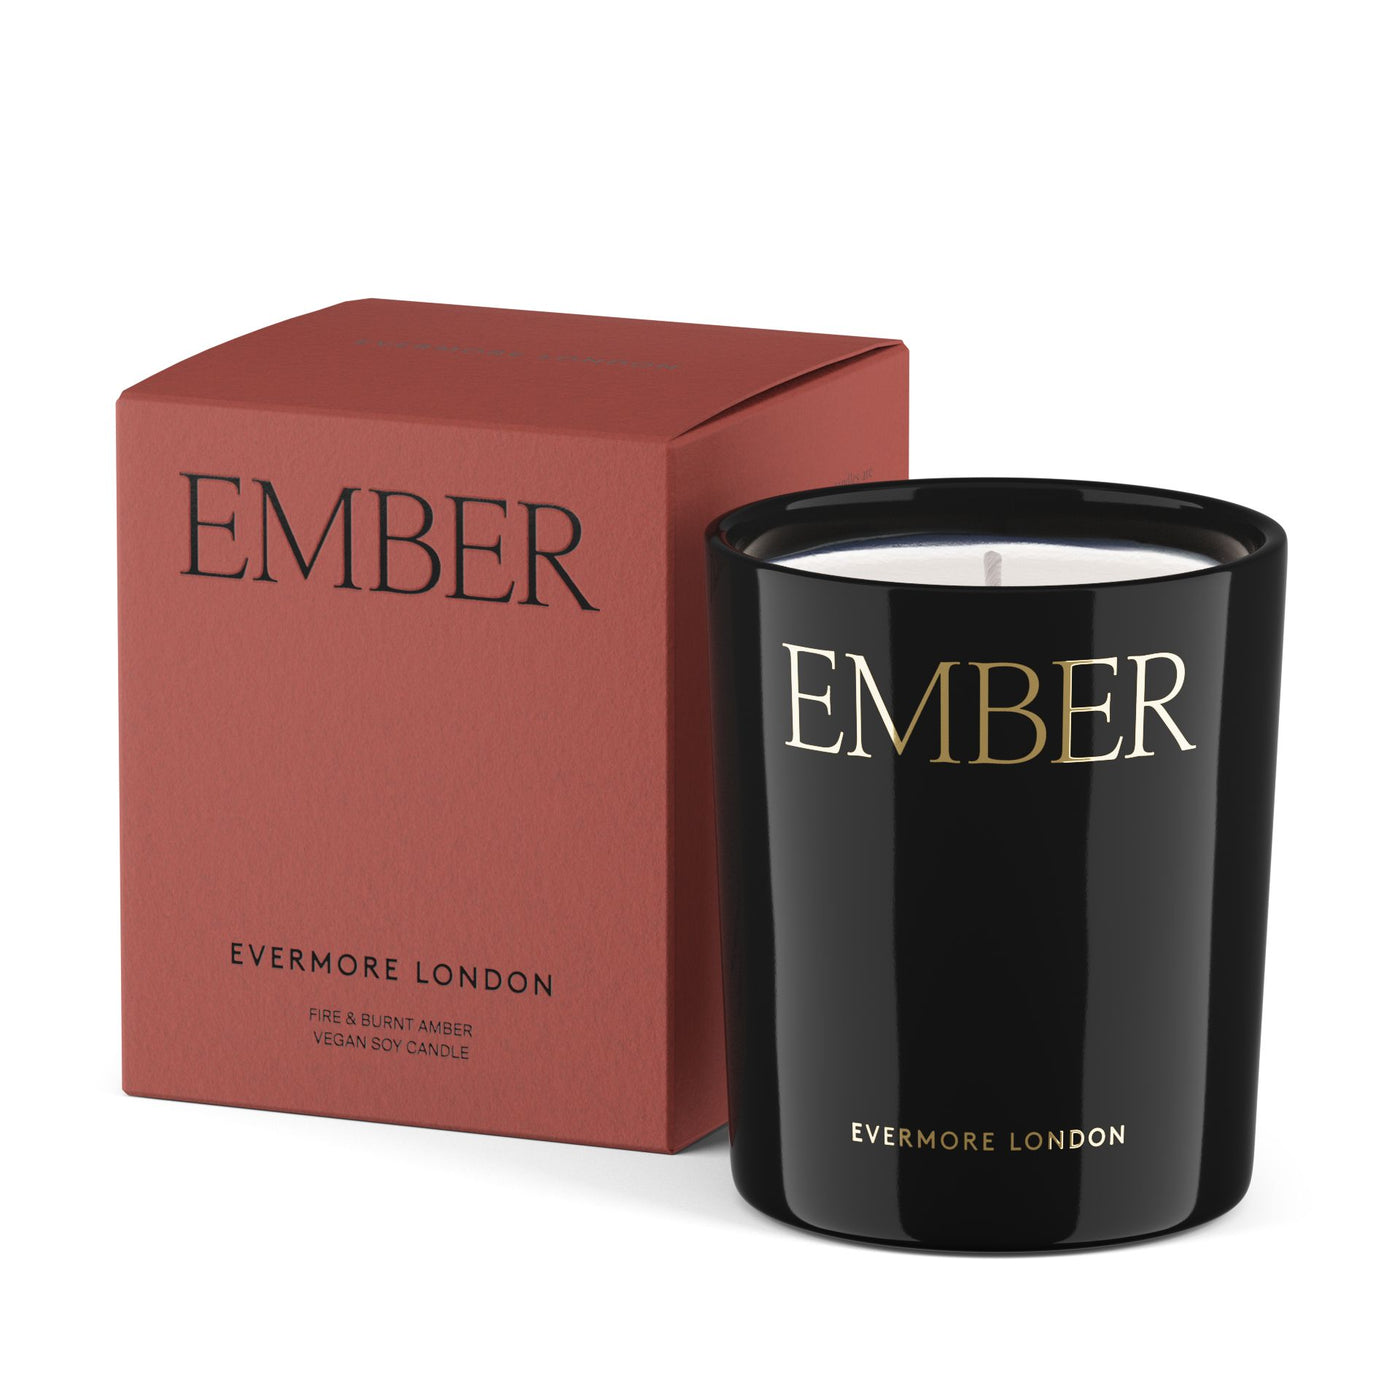 Evermore London Ember 145g Candle - Radical Living